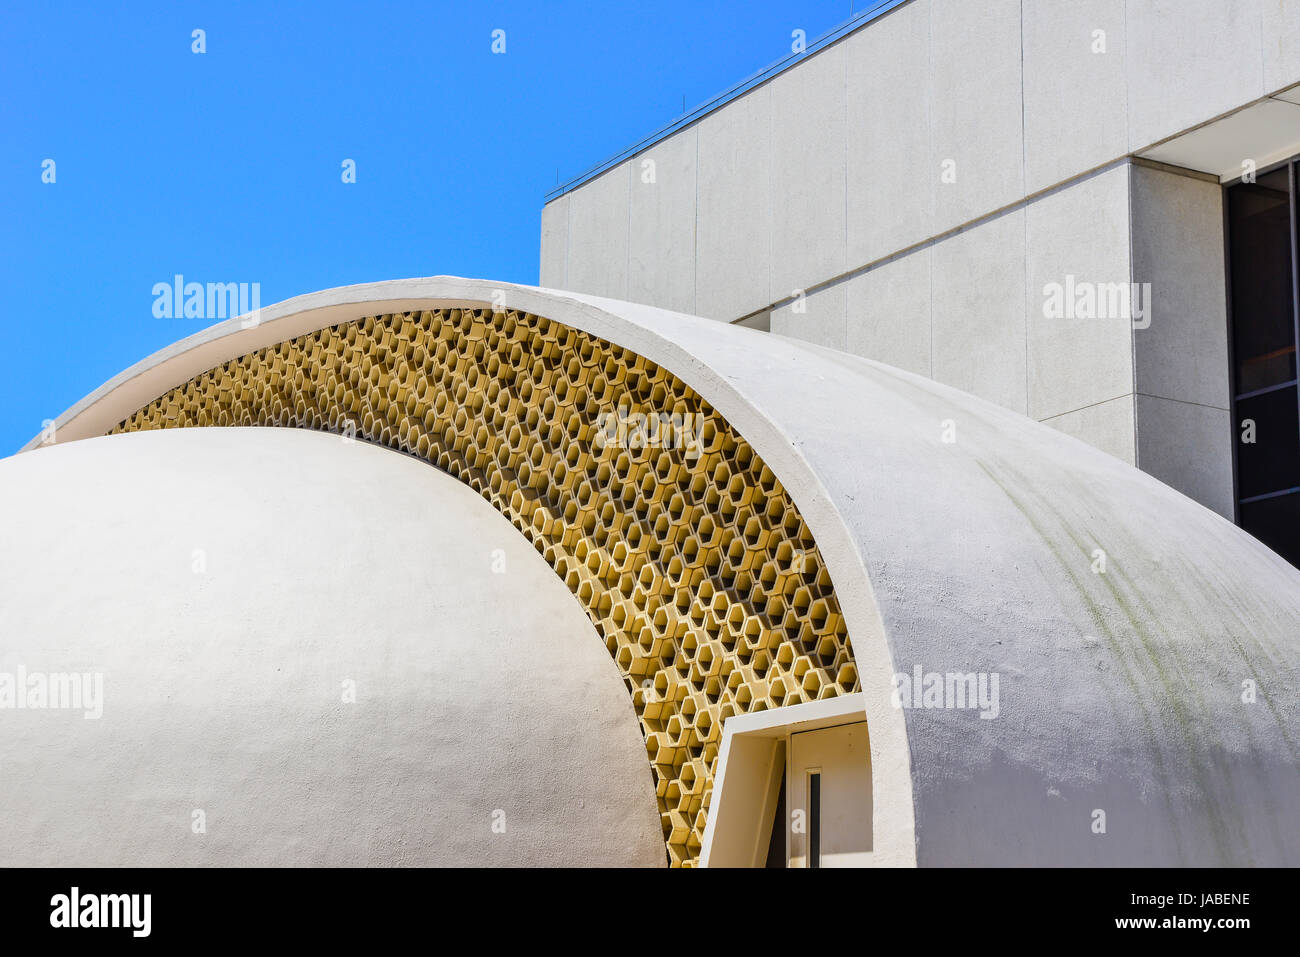 A modern and organic abstraction in architecture, the John E. Germany Public Library building, the 'hive', in downtown Tampa, FL Stock Photo